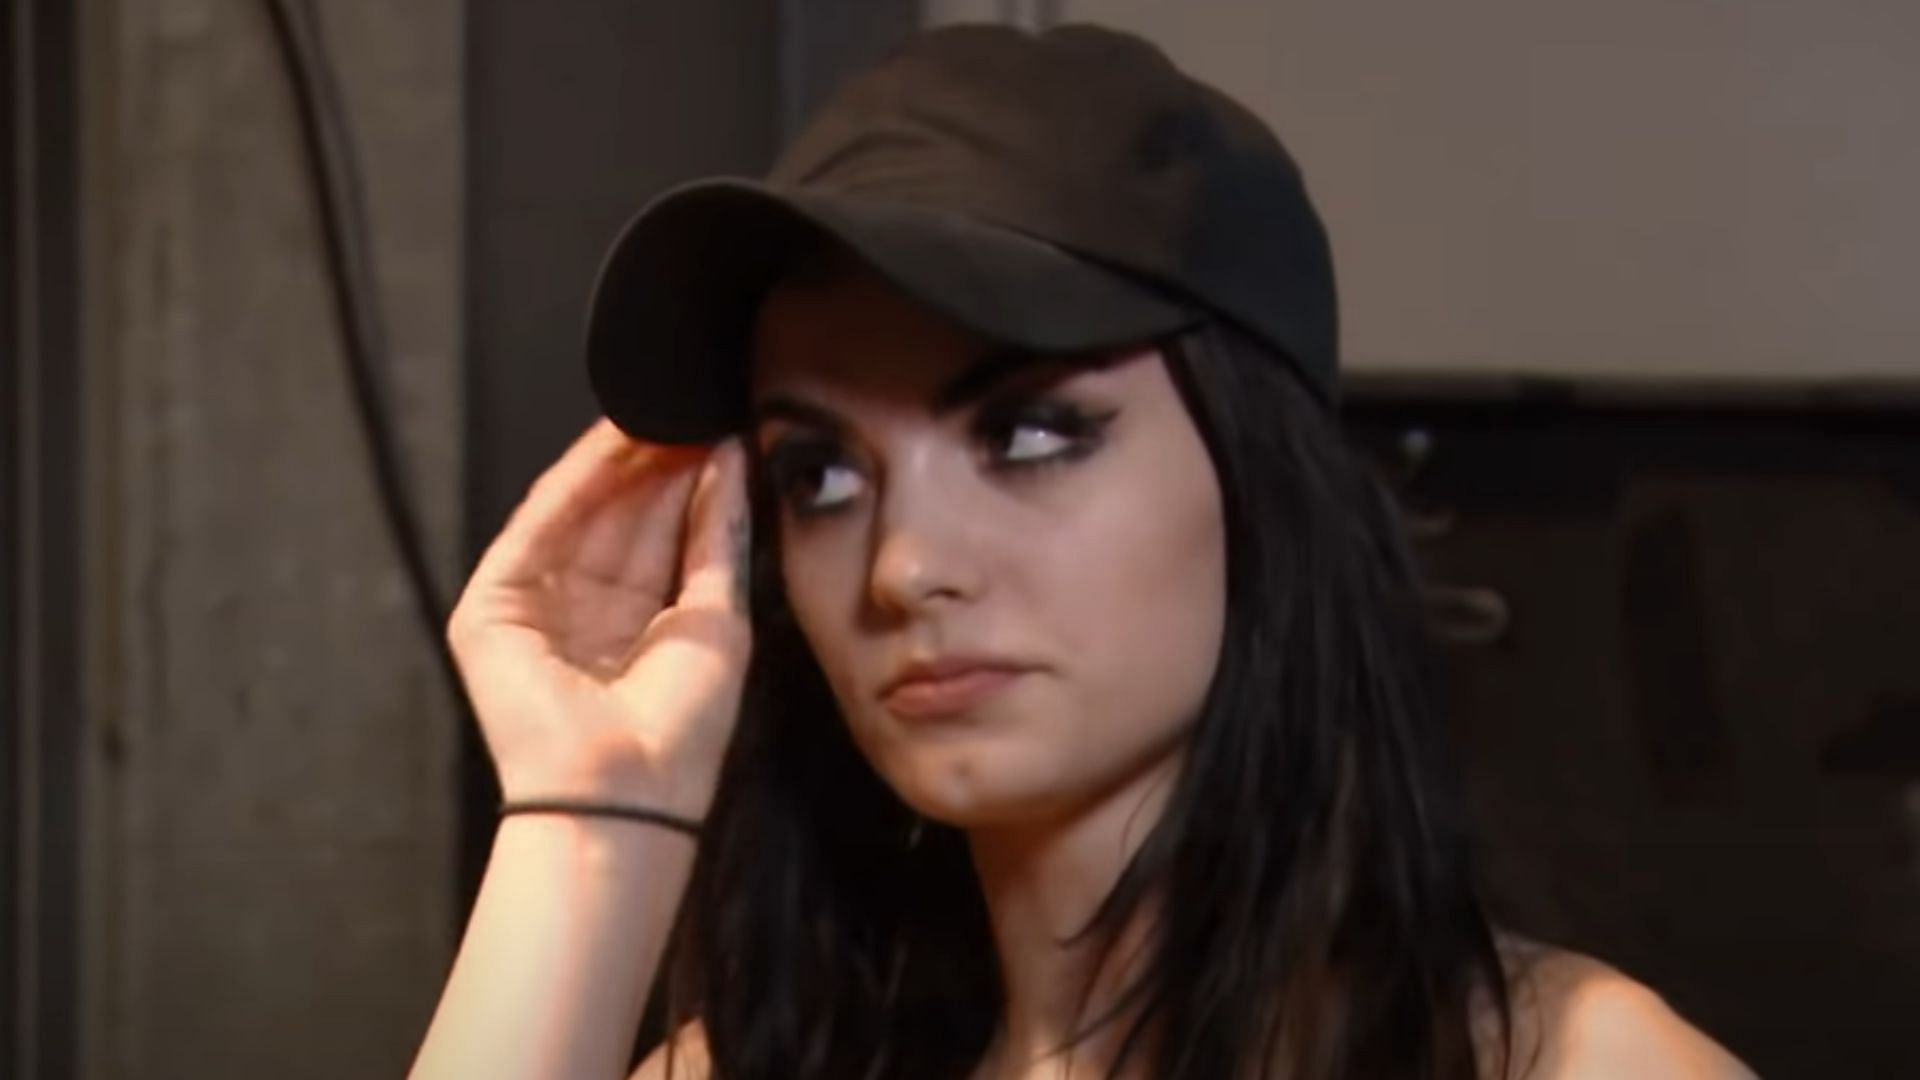 Paige apologized after making reallife friend cry in WWE